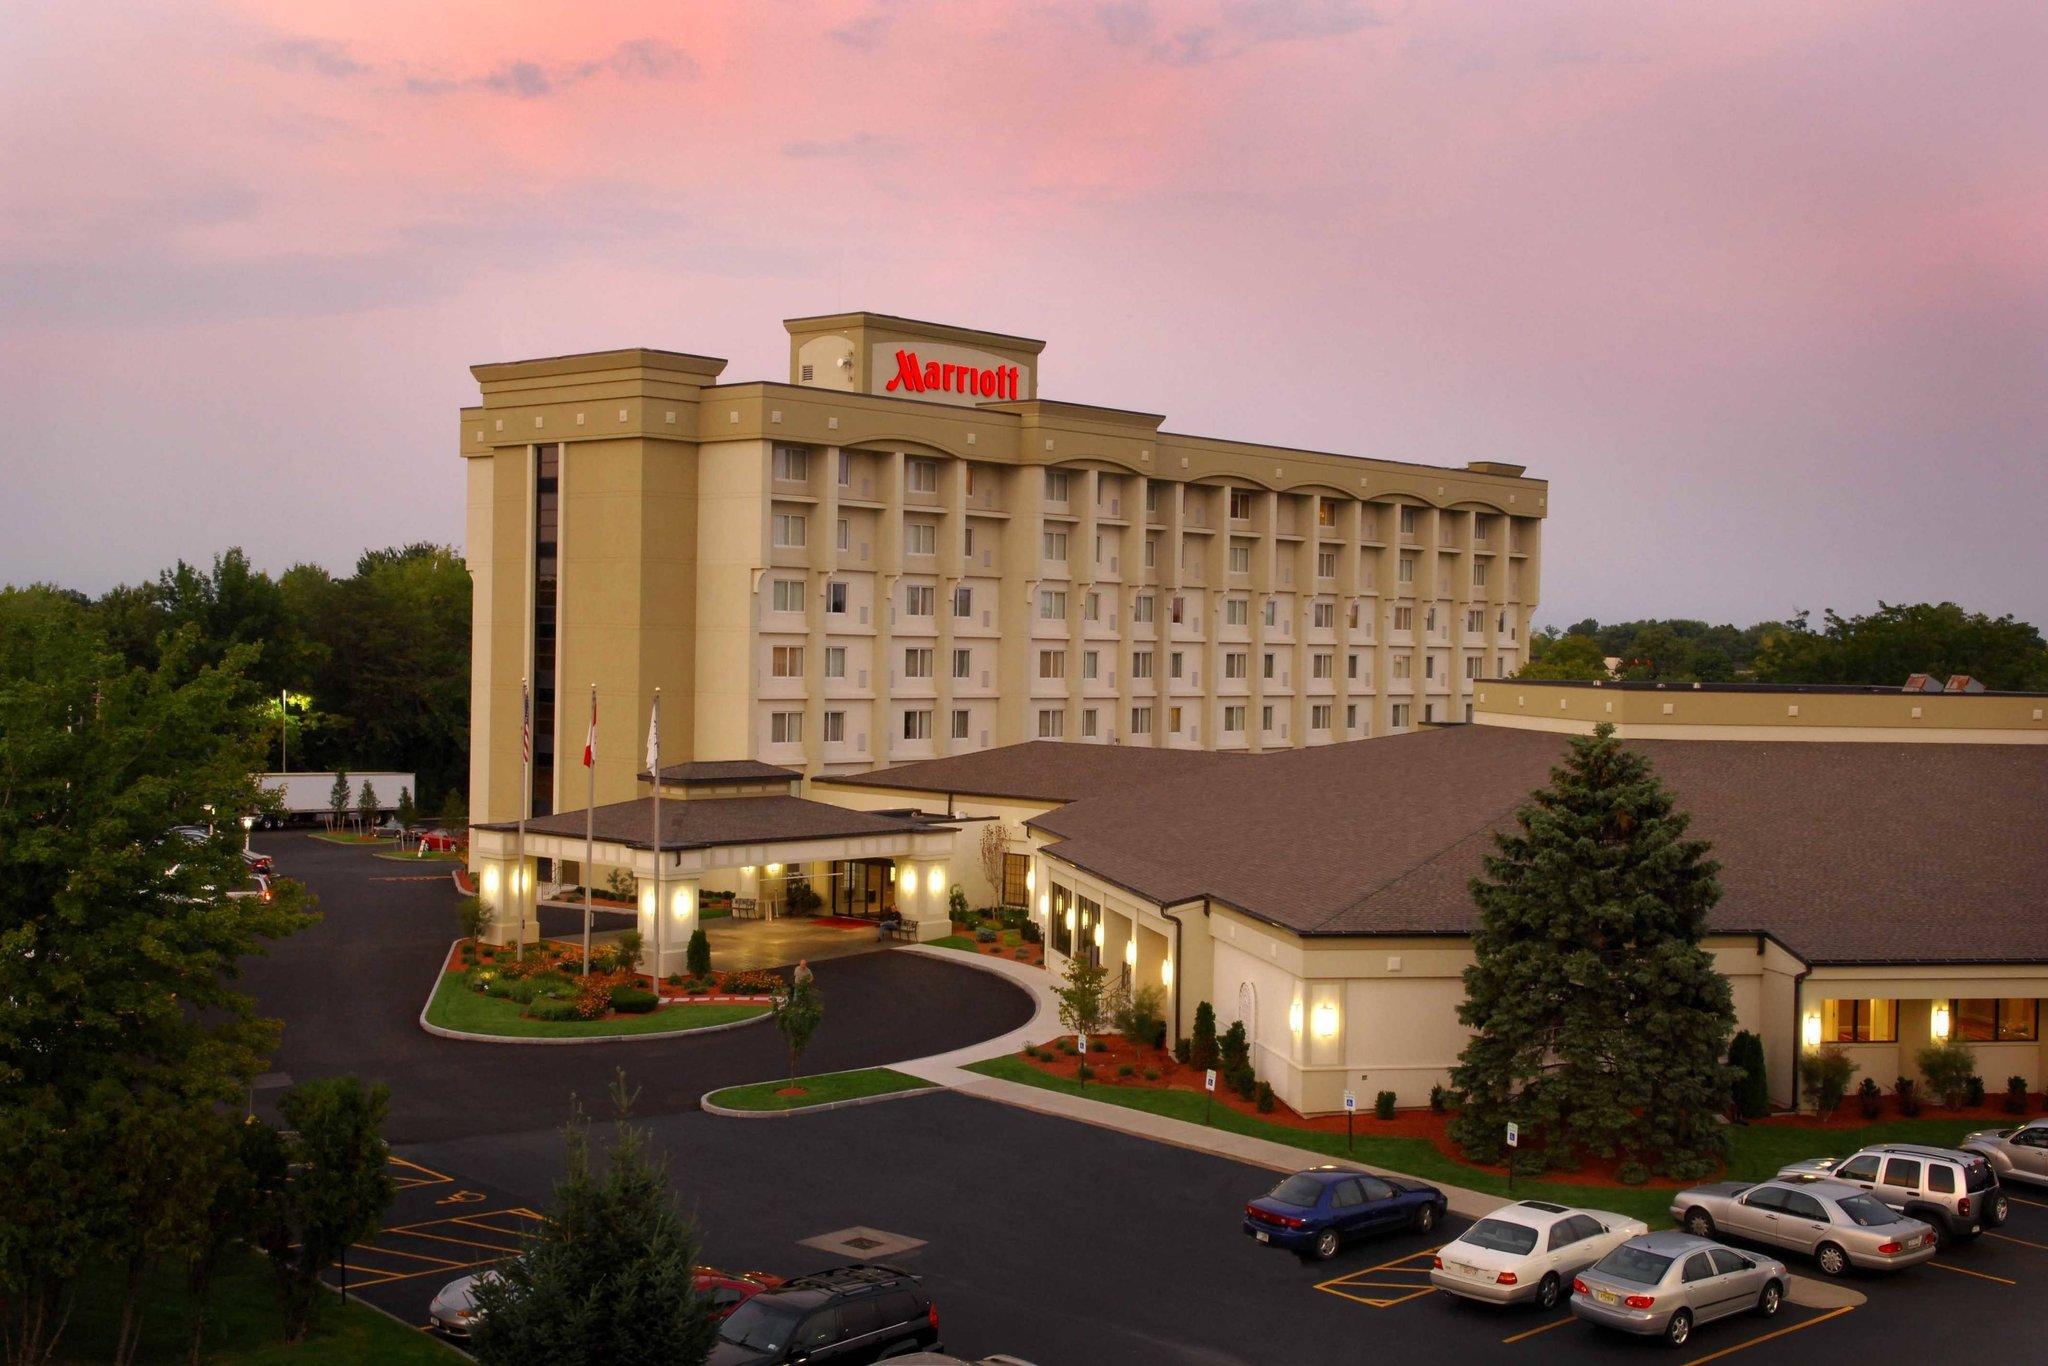 Rochester Airport Marriott in Rochester, NY